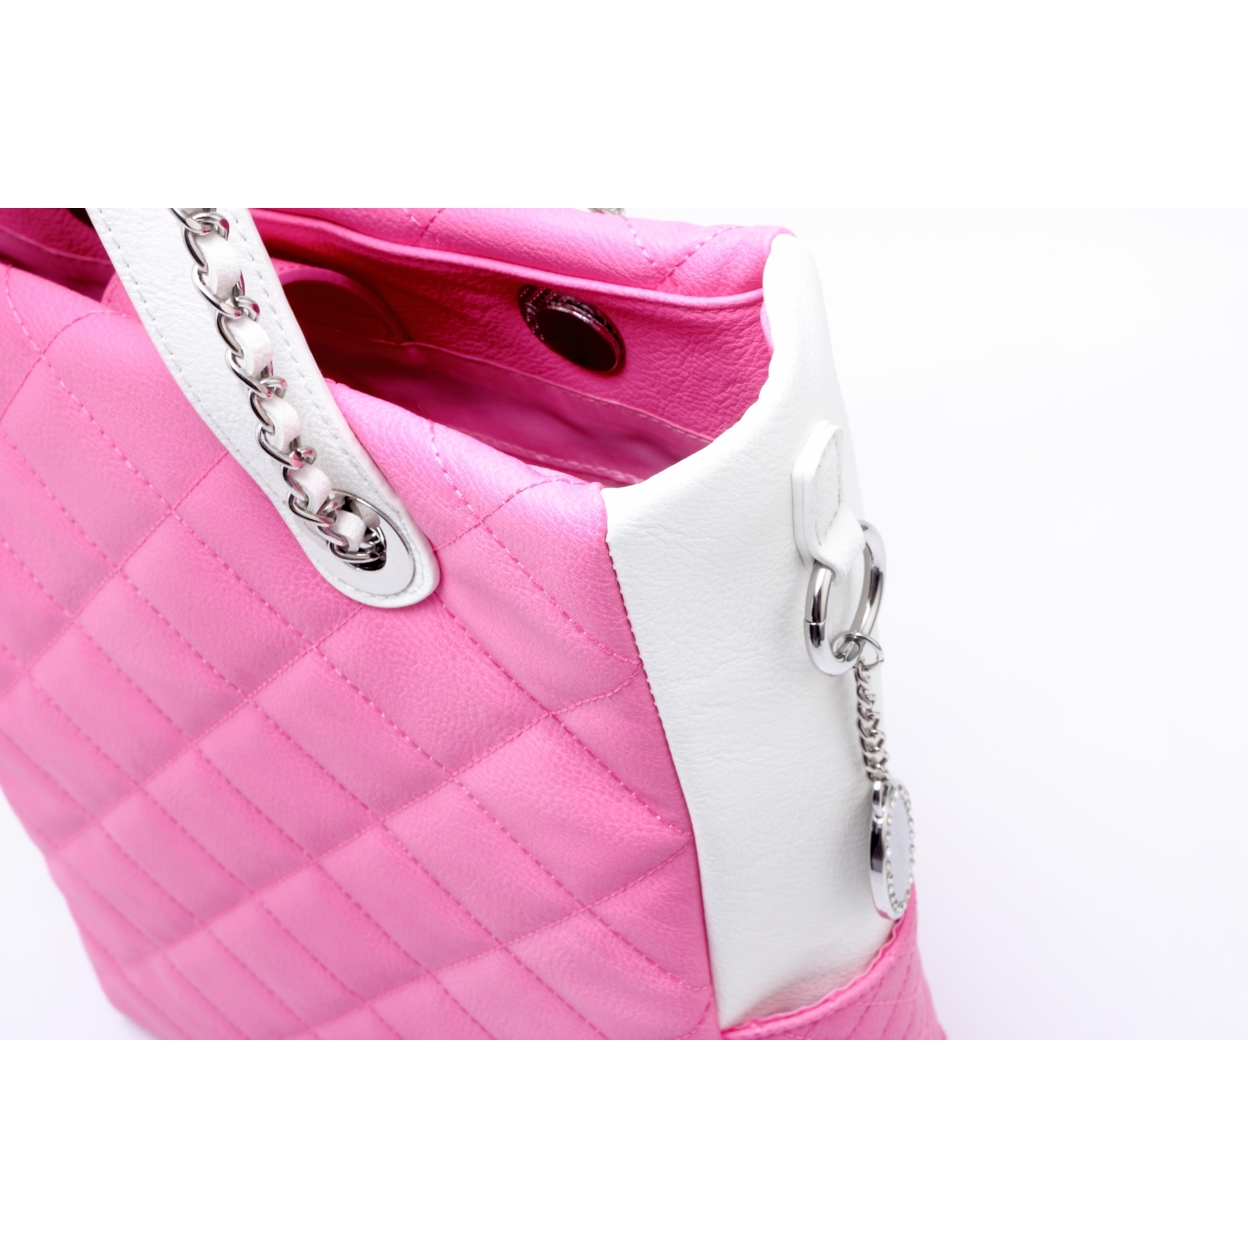 SCORE!'s Kat Travel Tote For Business, Work, Or School Quilted Shoulder Bag - Pink And White